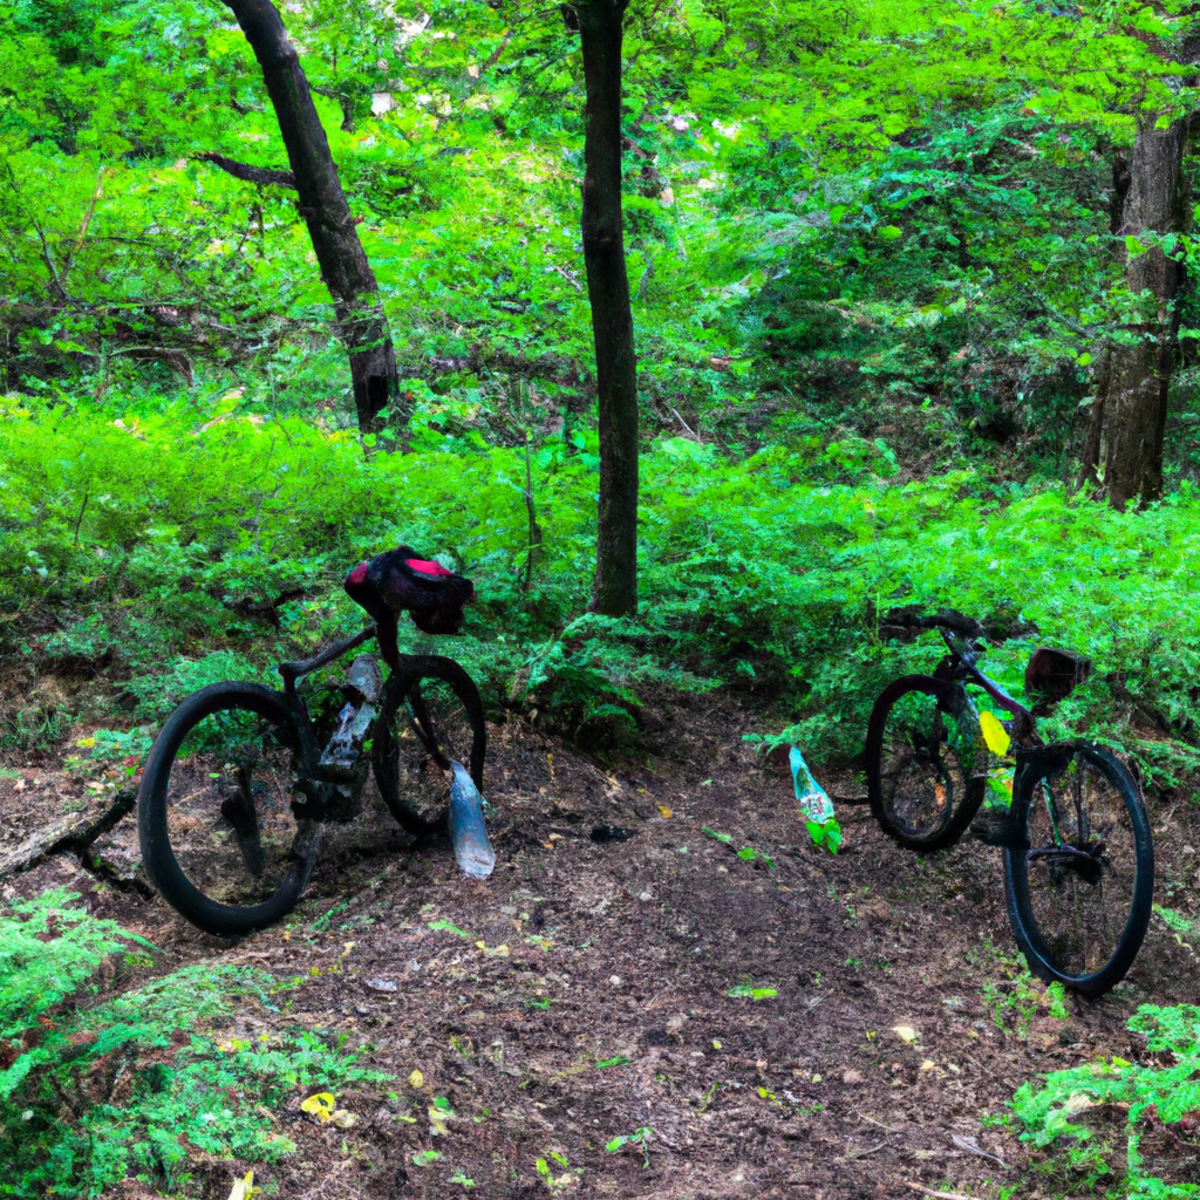 The photo captures a scenic view of a lush green forest with a winding trail in the foreground. On the trail, there are two bicycles parked next to each other, indicating a break in the midst of a biking session. A water bottle and a backpack lie next to the bikes, suggesting that the riders are taking a moment to hydrate and refuel. In the background, there are towering trees and a clear blue sky, creating a serene and peaceful atmosphere. The photo perfectly encapsulates the essence of outdoor fitness and the joy of exploring nature while staying active.